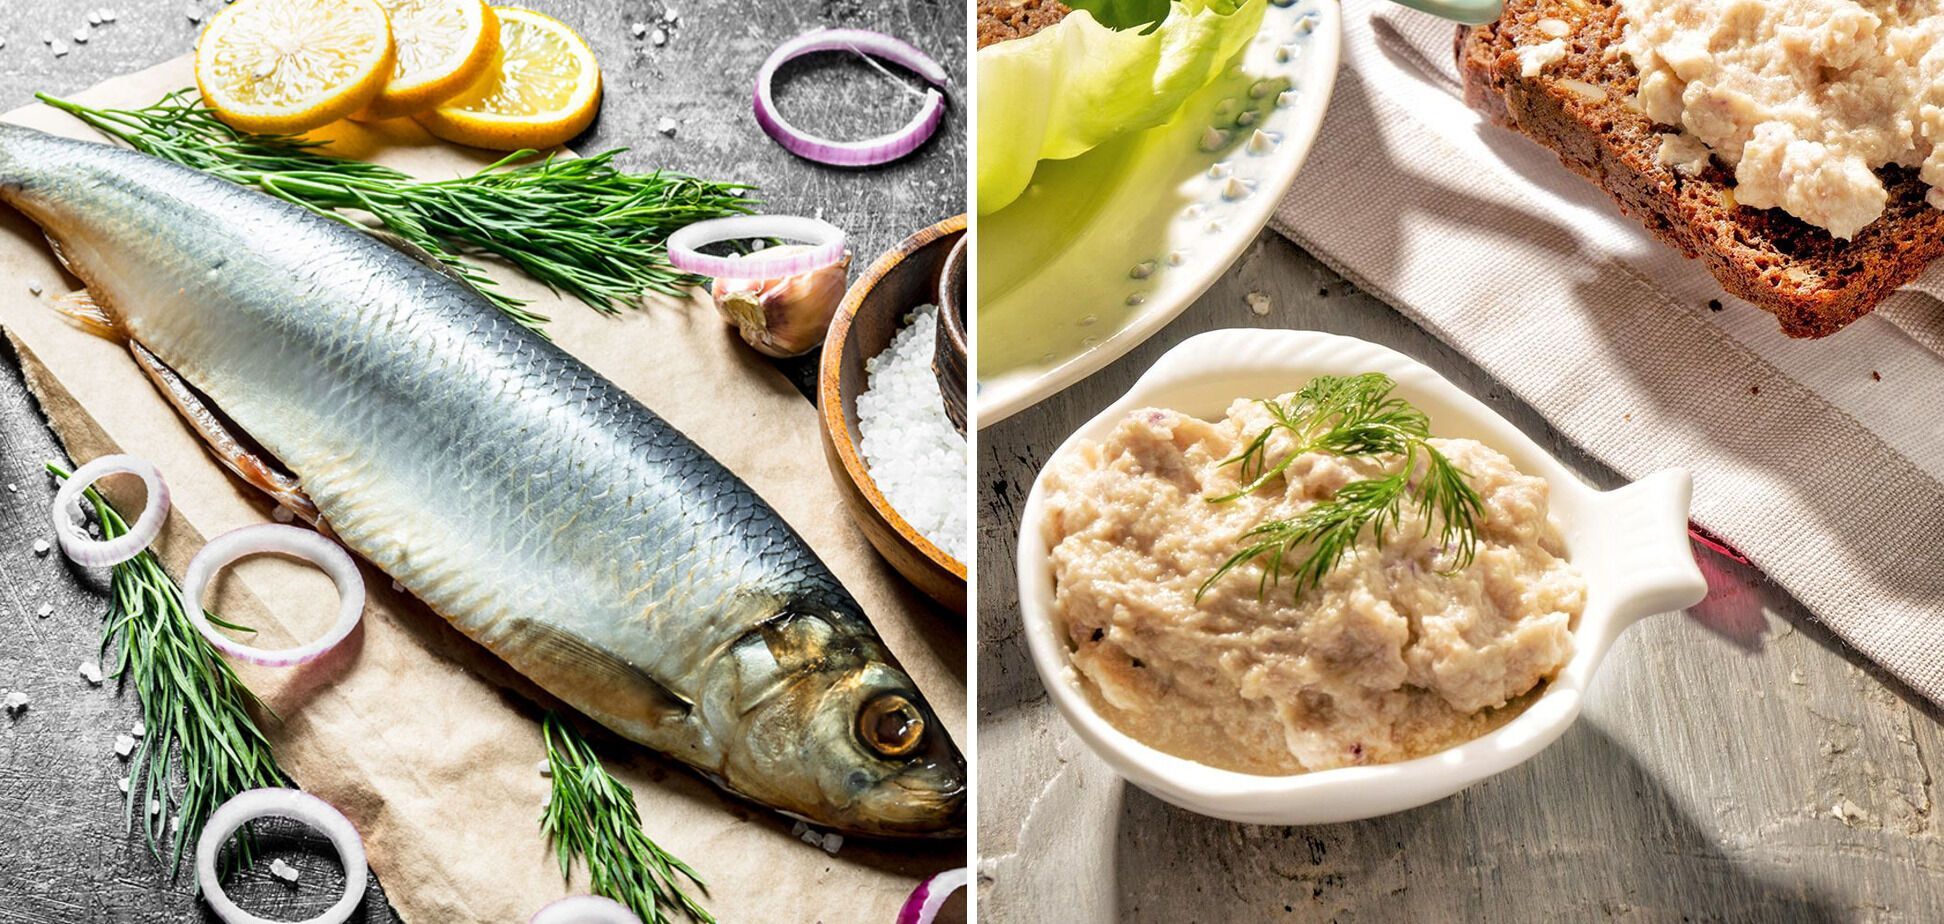 What to cook with herring